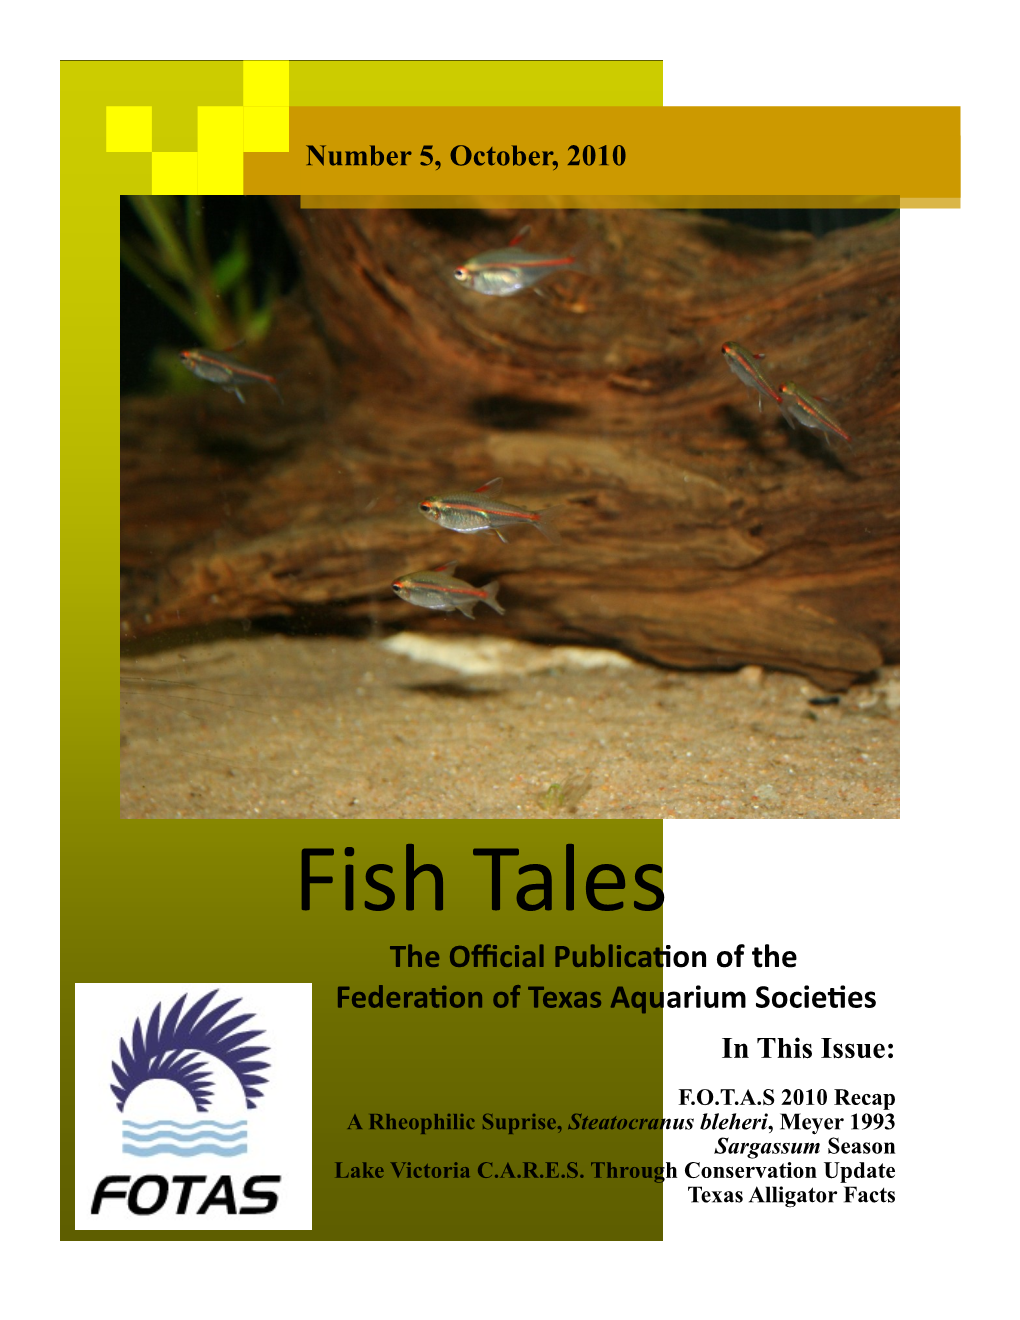 Fish Tales the Official Publication of the Federation of Texas Aquarium Societies in This Issue